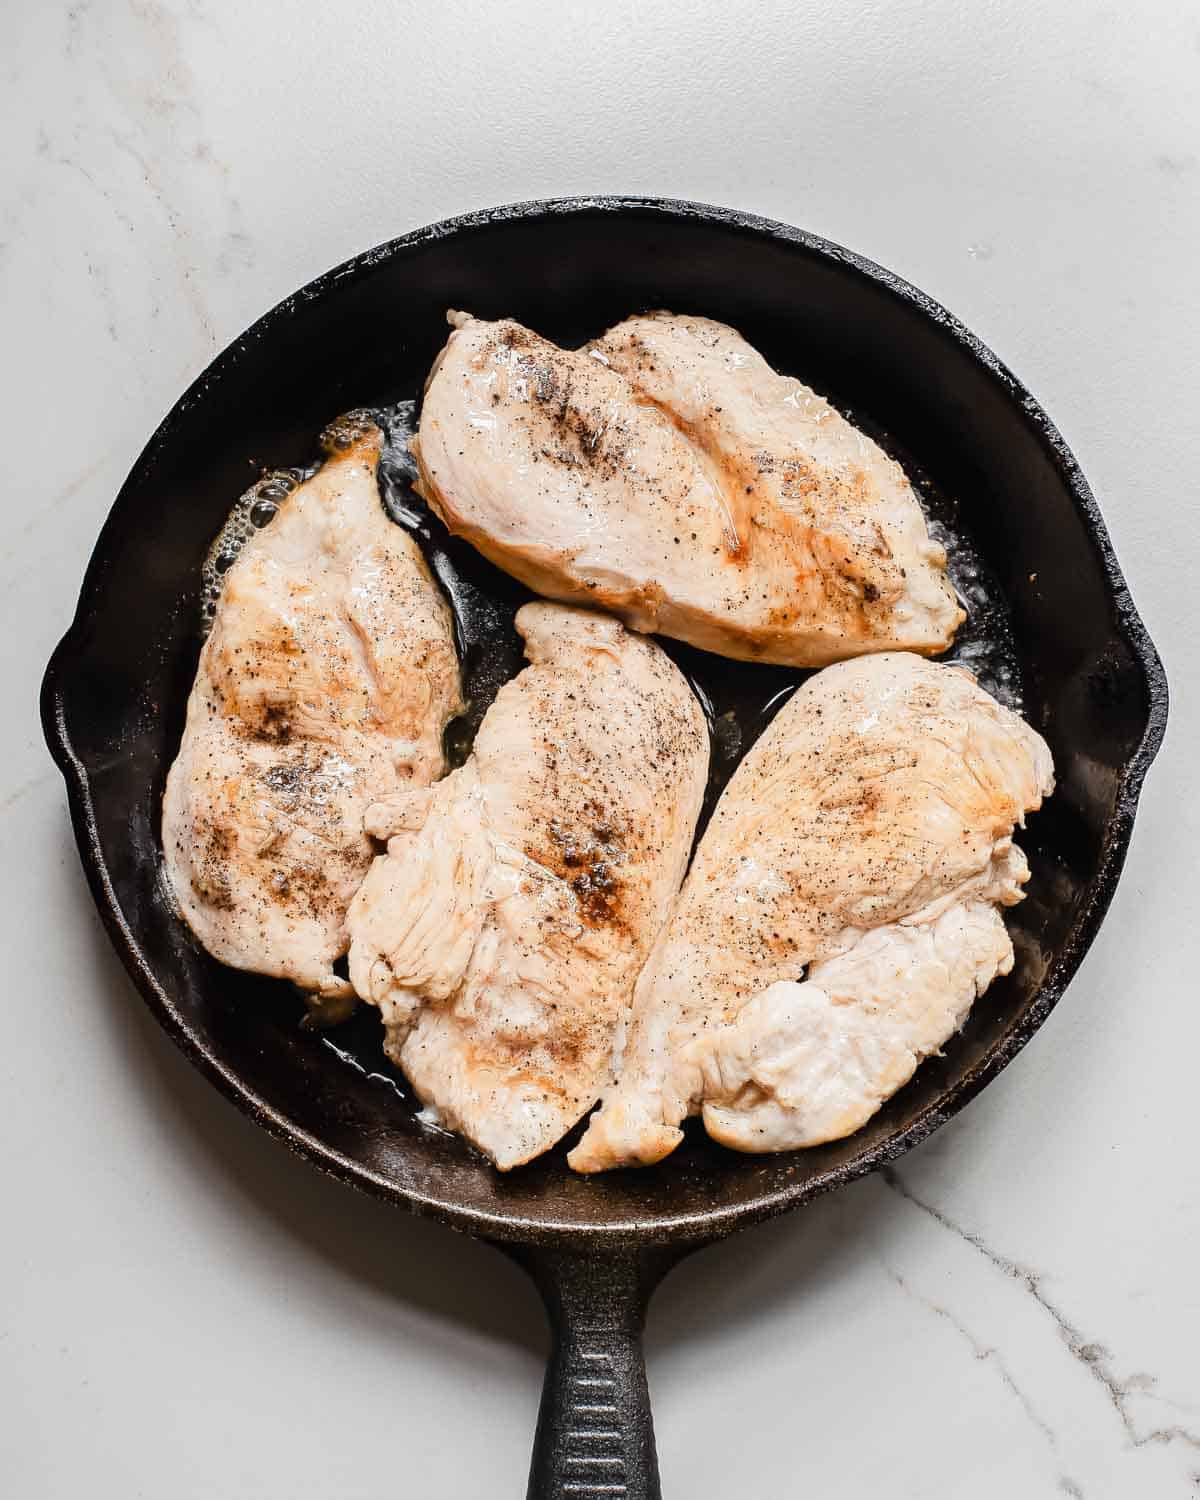 Chicken breasts in a cast iron skillet.